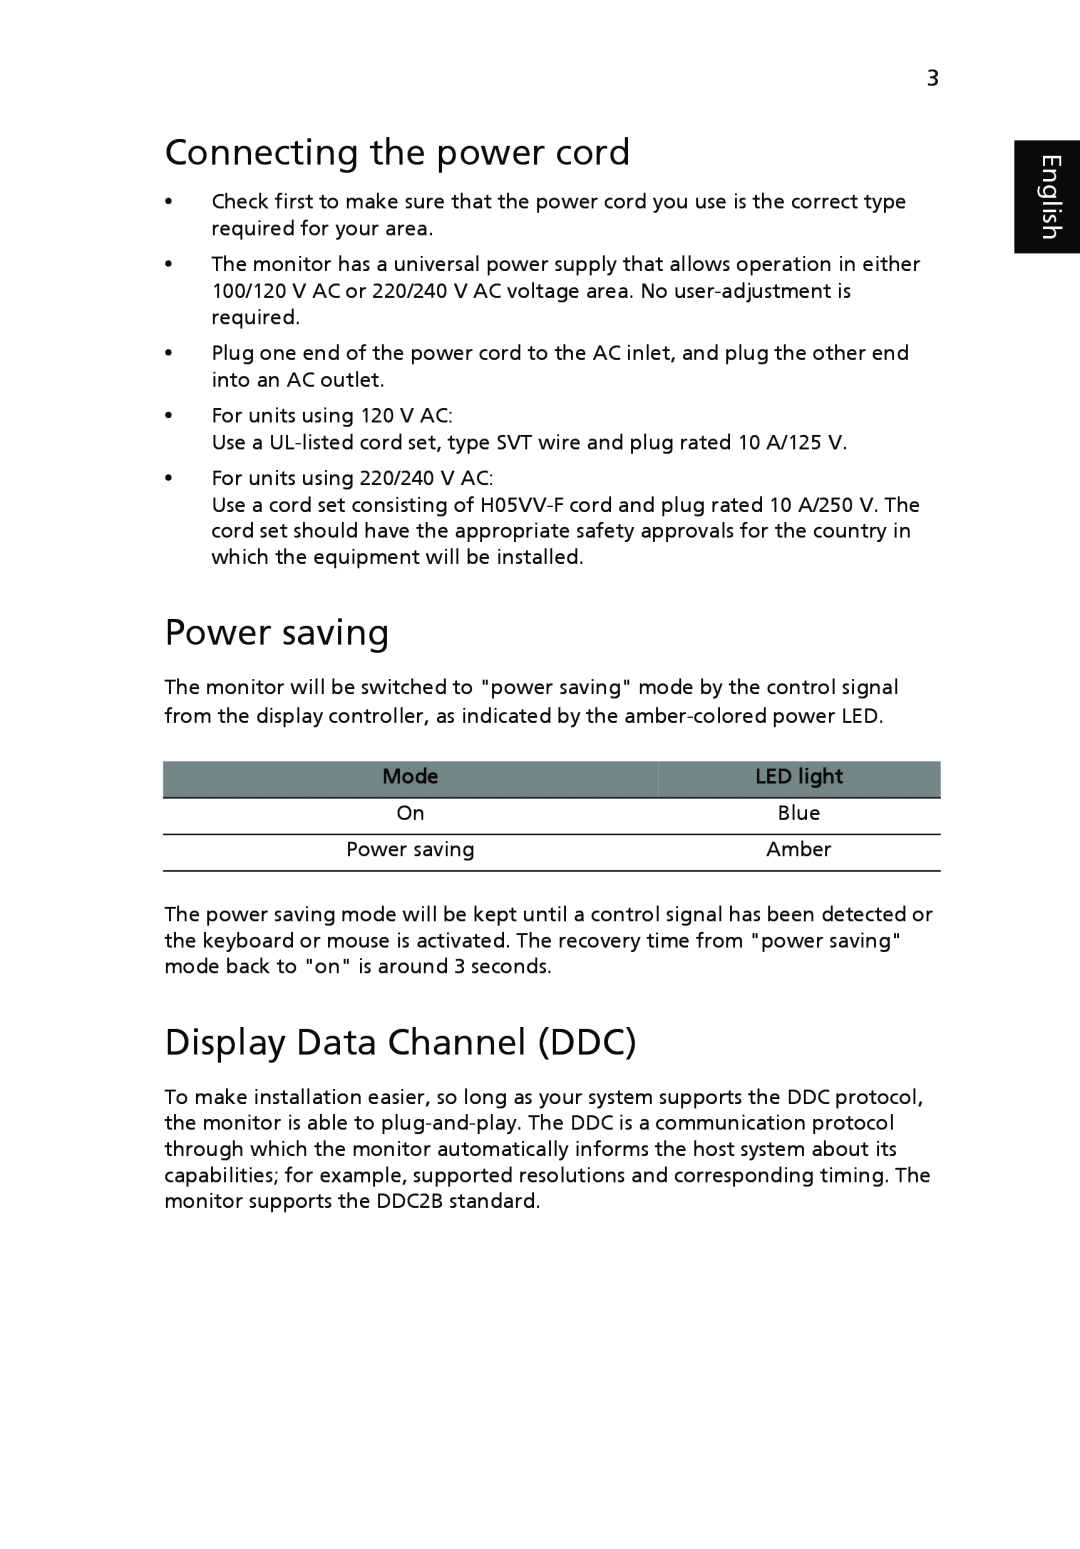 Acer V193L manual Connecting the power cord, Power saving, Display Data Channel DDC, English, Mode, LED light 